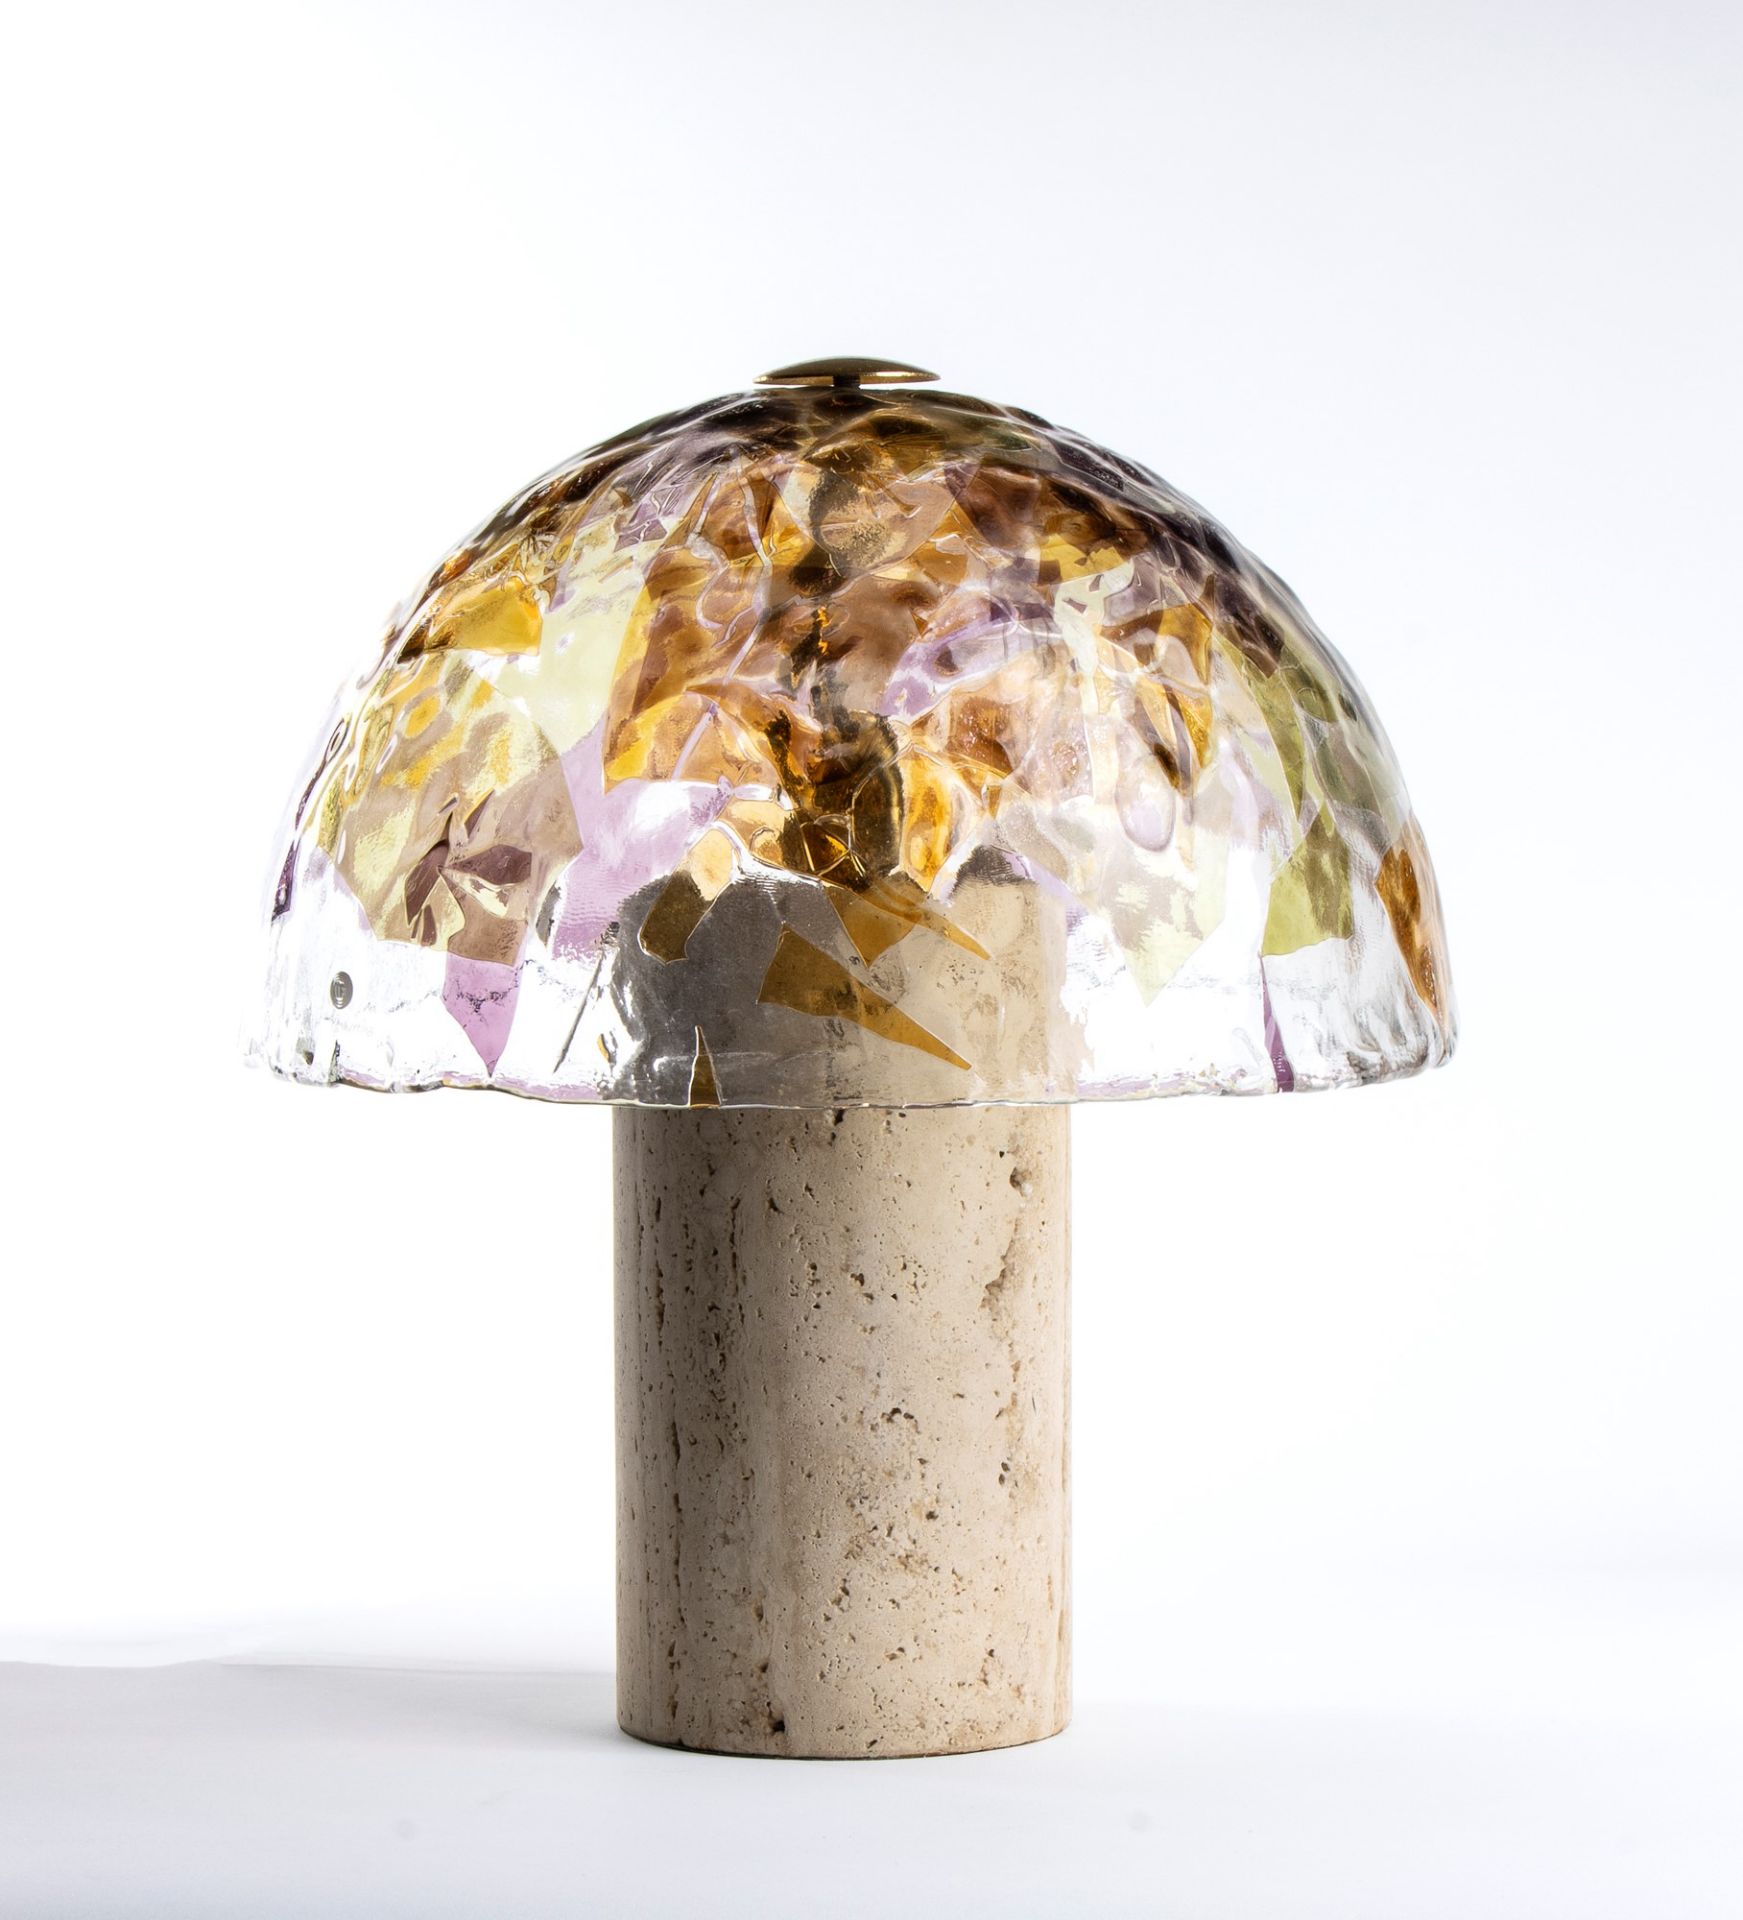 Polychrome blown glass table lamp by La Murrina - Image 5 of 15